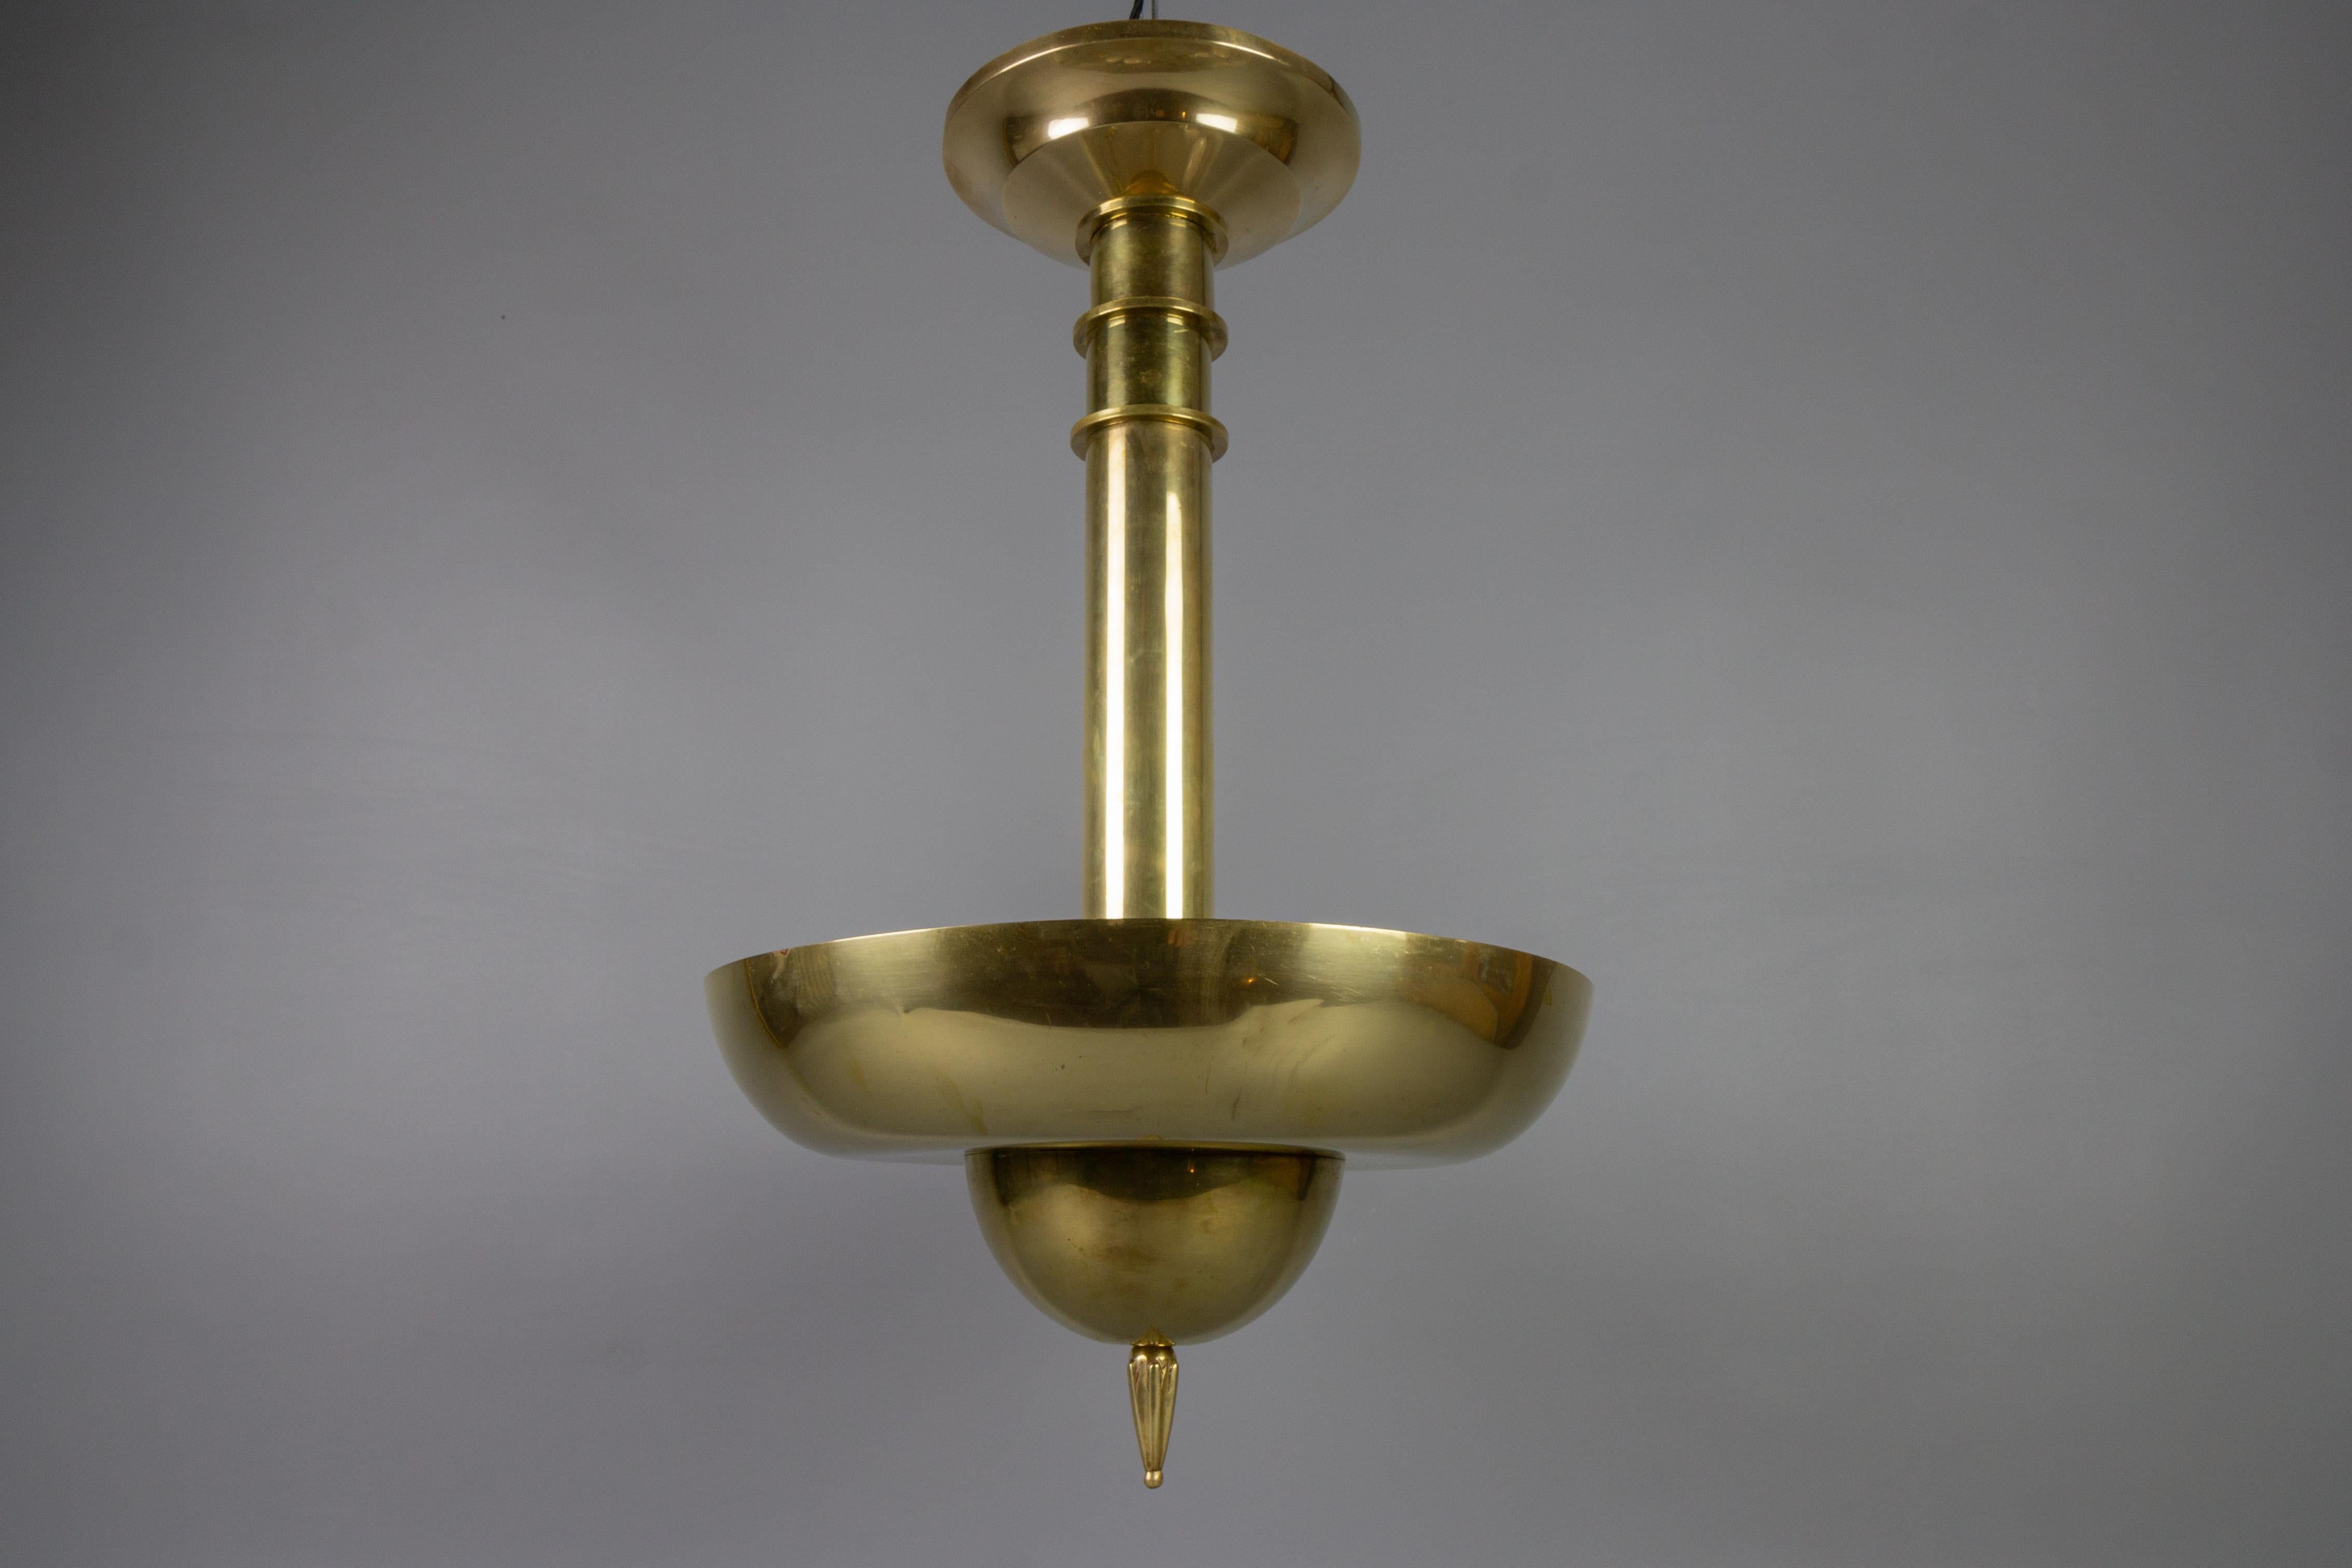 Art Deco brass inverted dome six-light pendant lamp, Germany, ca. 1930.
Impressive and very unusual inverted dome brass pendant chandelier with six interior lights - six sockets for E14 size light bulbs.
Dimensions: height: circa 60 cm / 23.62 in;